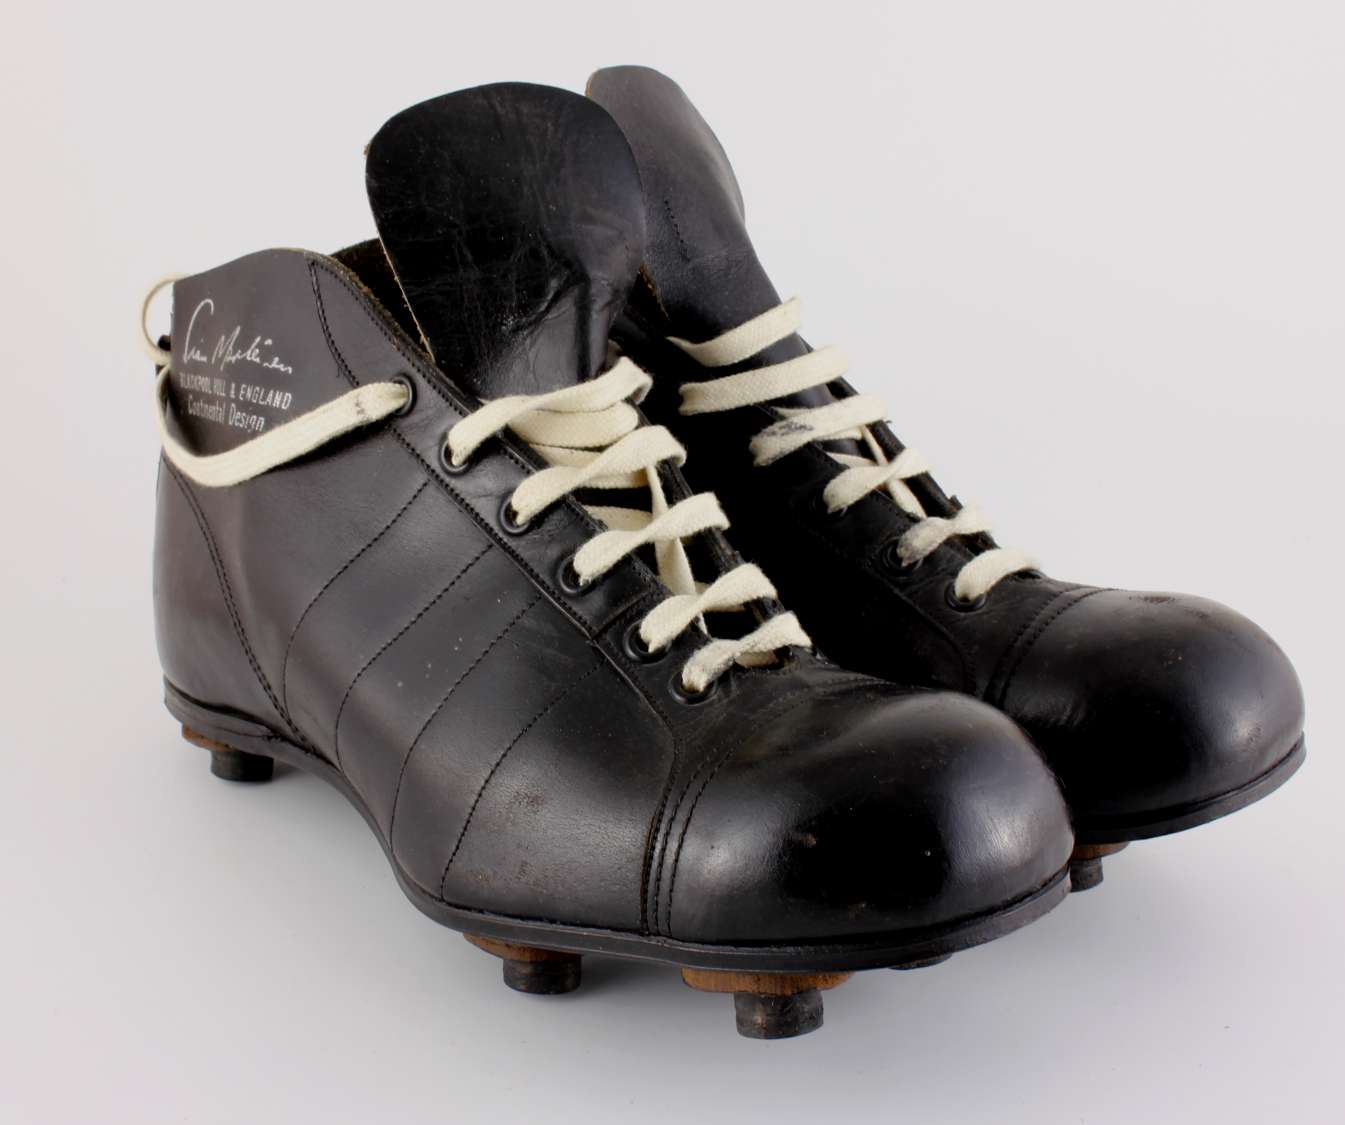 Vintage 1950s Stan Mortensen Blackpool Leather Football Boots. Old Soccer Cleats.